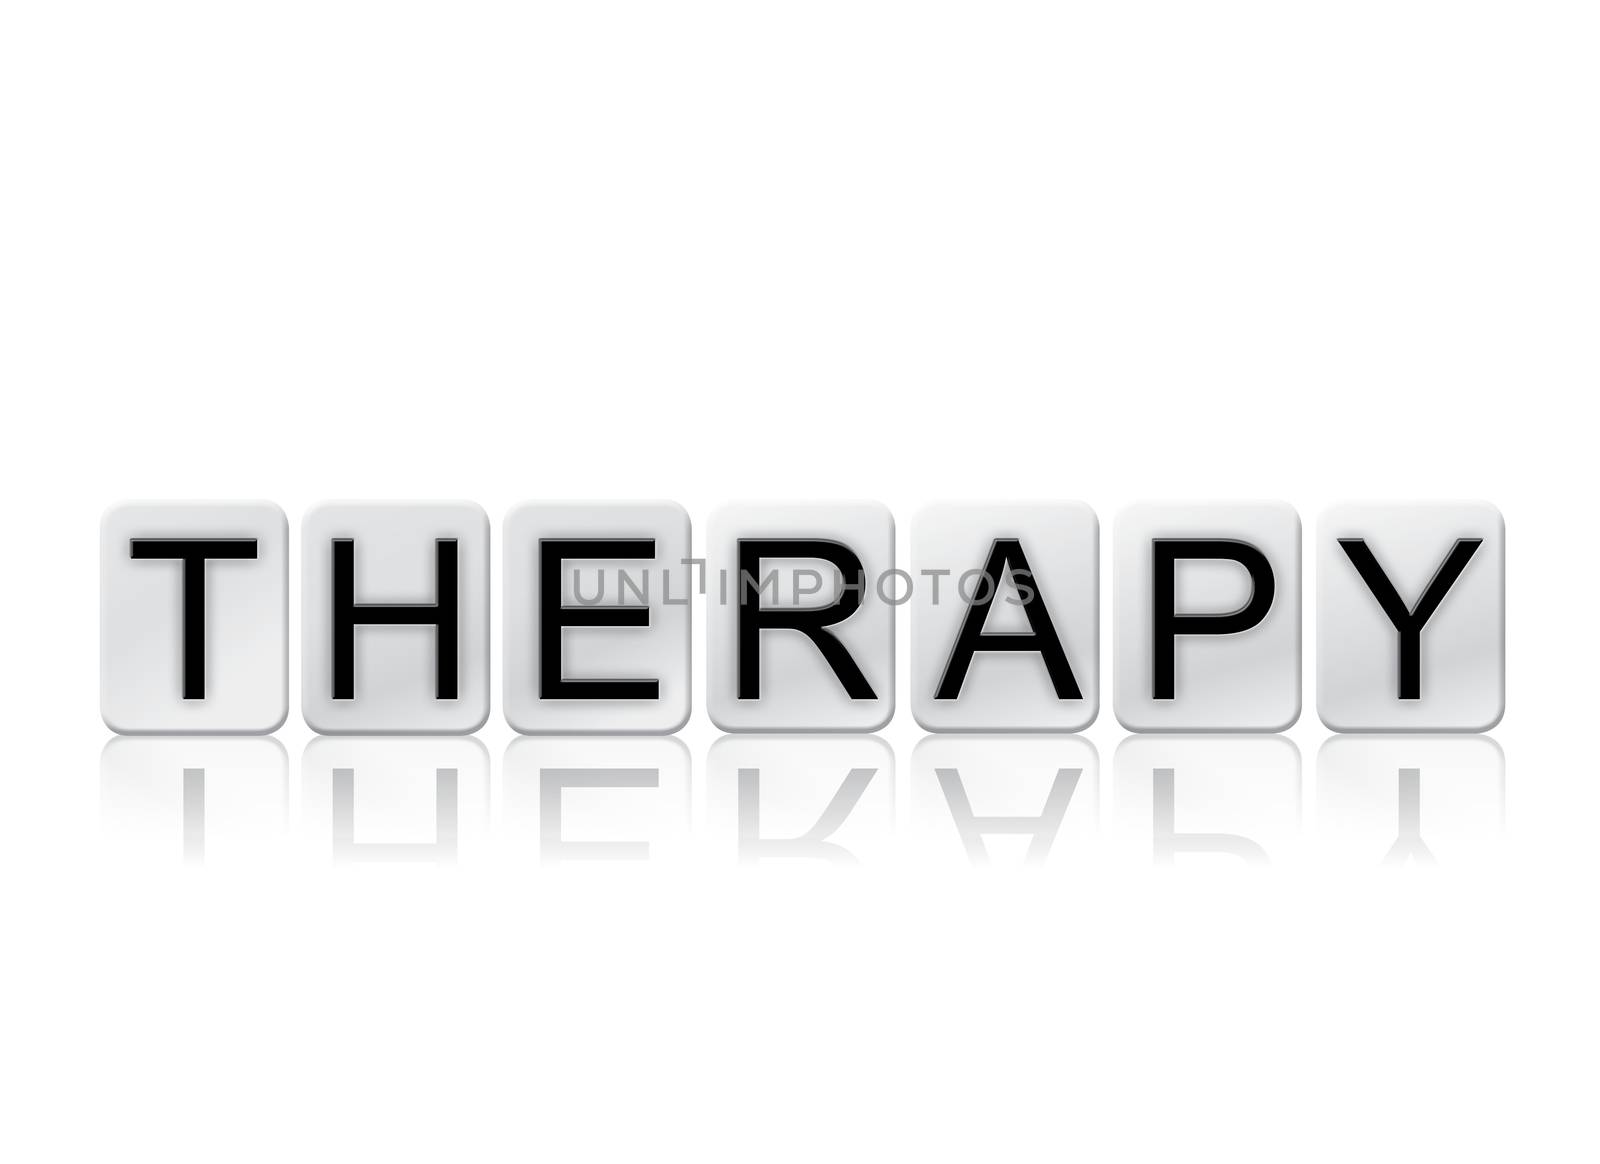 The word "Therapy" written in tile letters isolated on a white background.